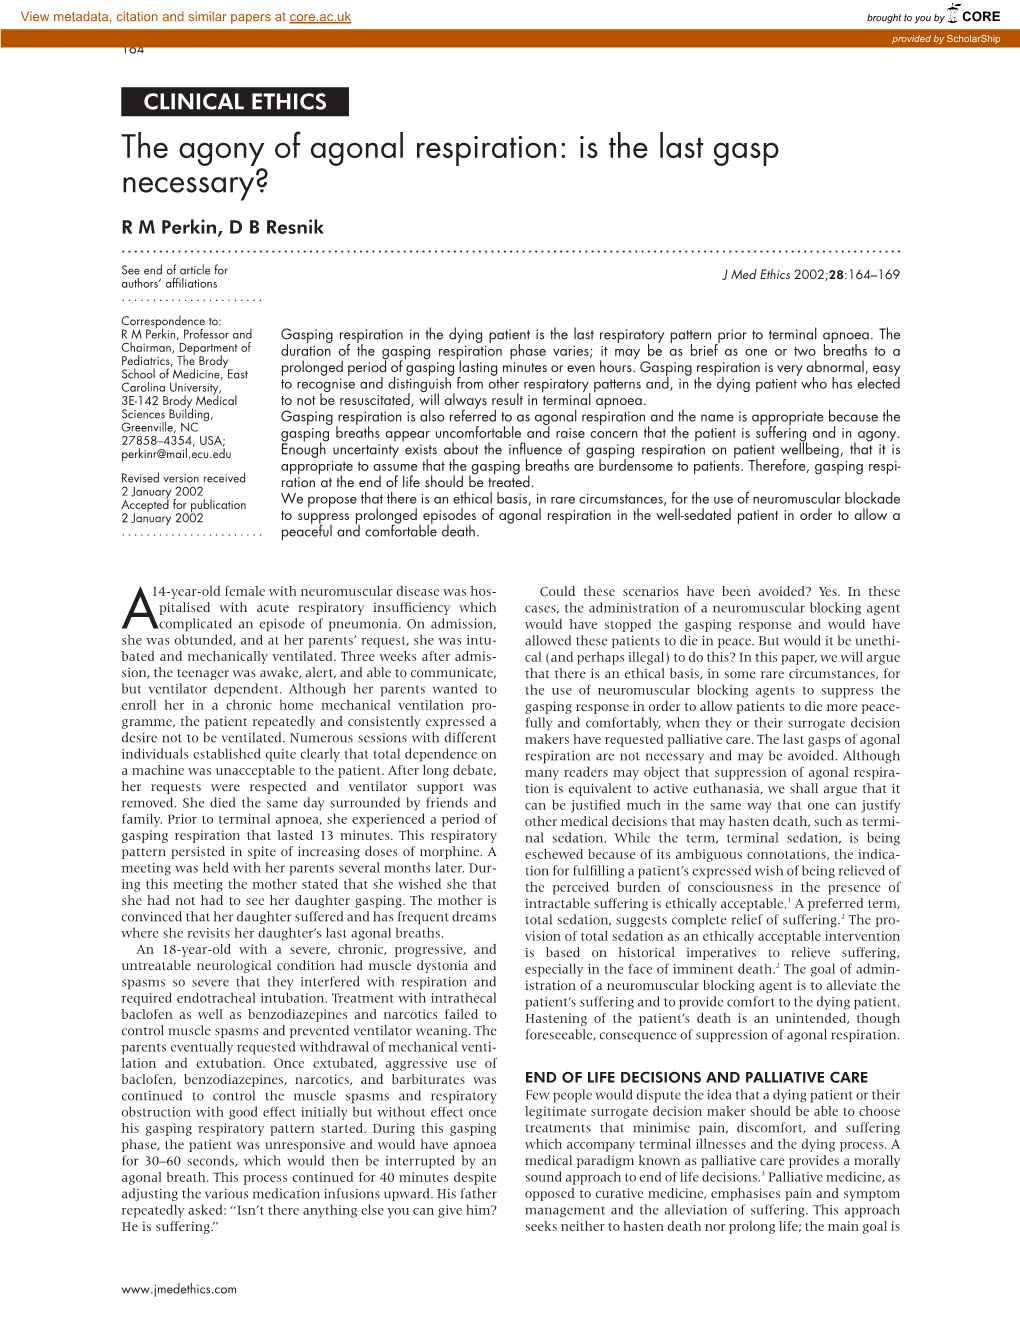 The Agony of Agonal Respiration: Is the Last Gasp Necessary? R M Perkin, D B Resnik